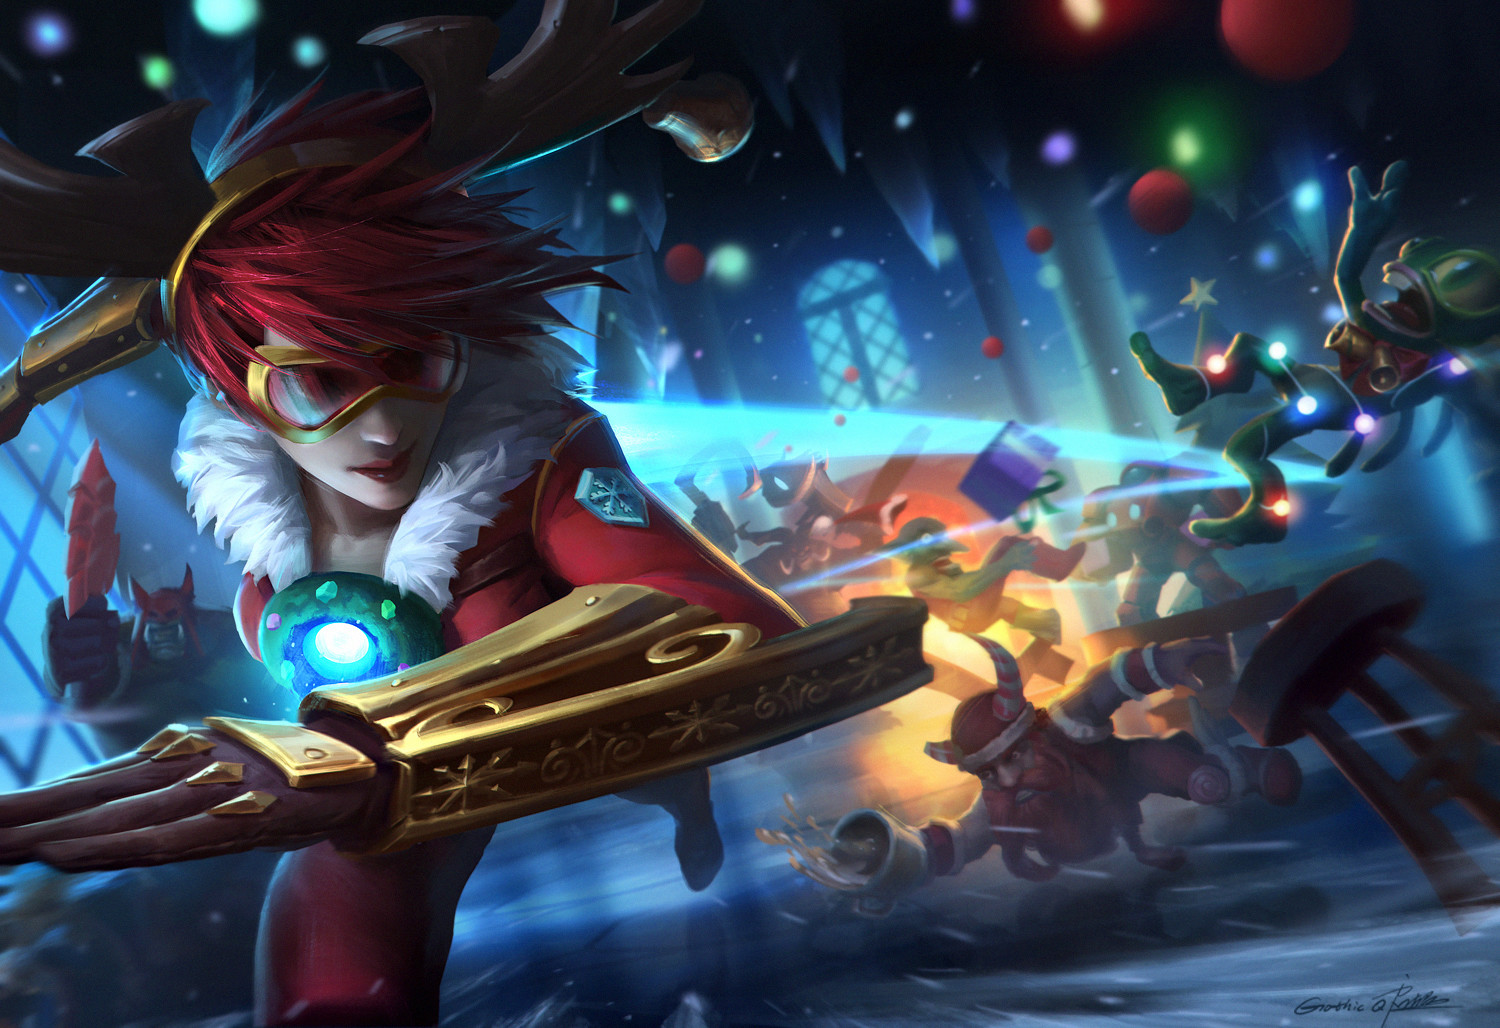 overwatch christmas wallpaper,action adventure game,games,pc game,cg artwork,adventure game